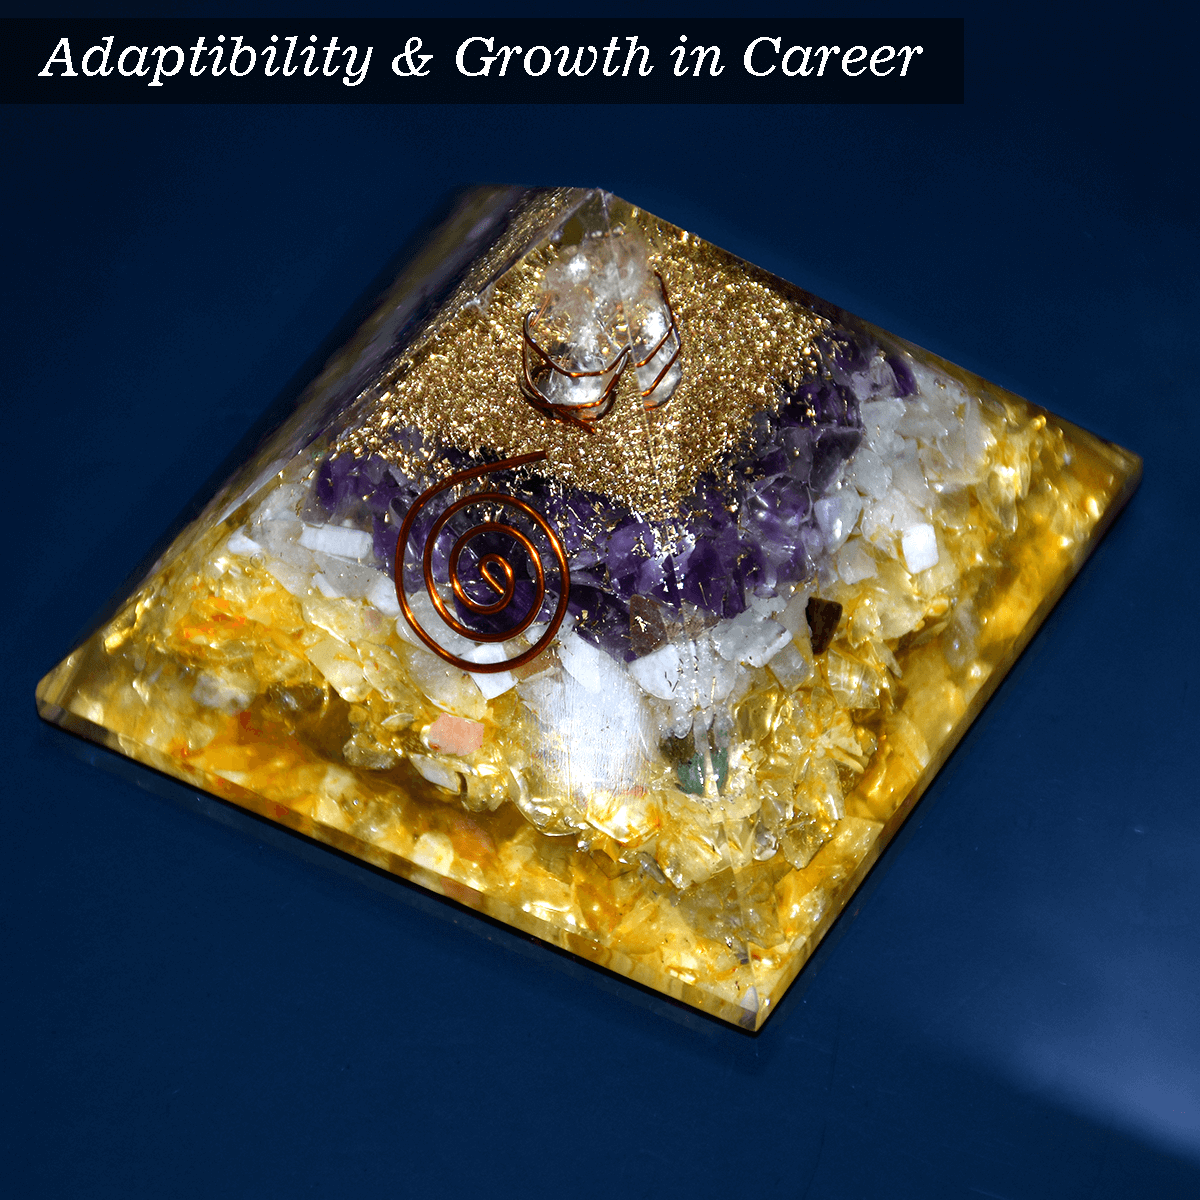 Adaptability & Growth in Career Pyramid, Made of Natural Crystal for Growth, Stability in Career. Feng Shui remedy